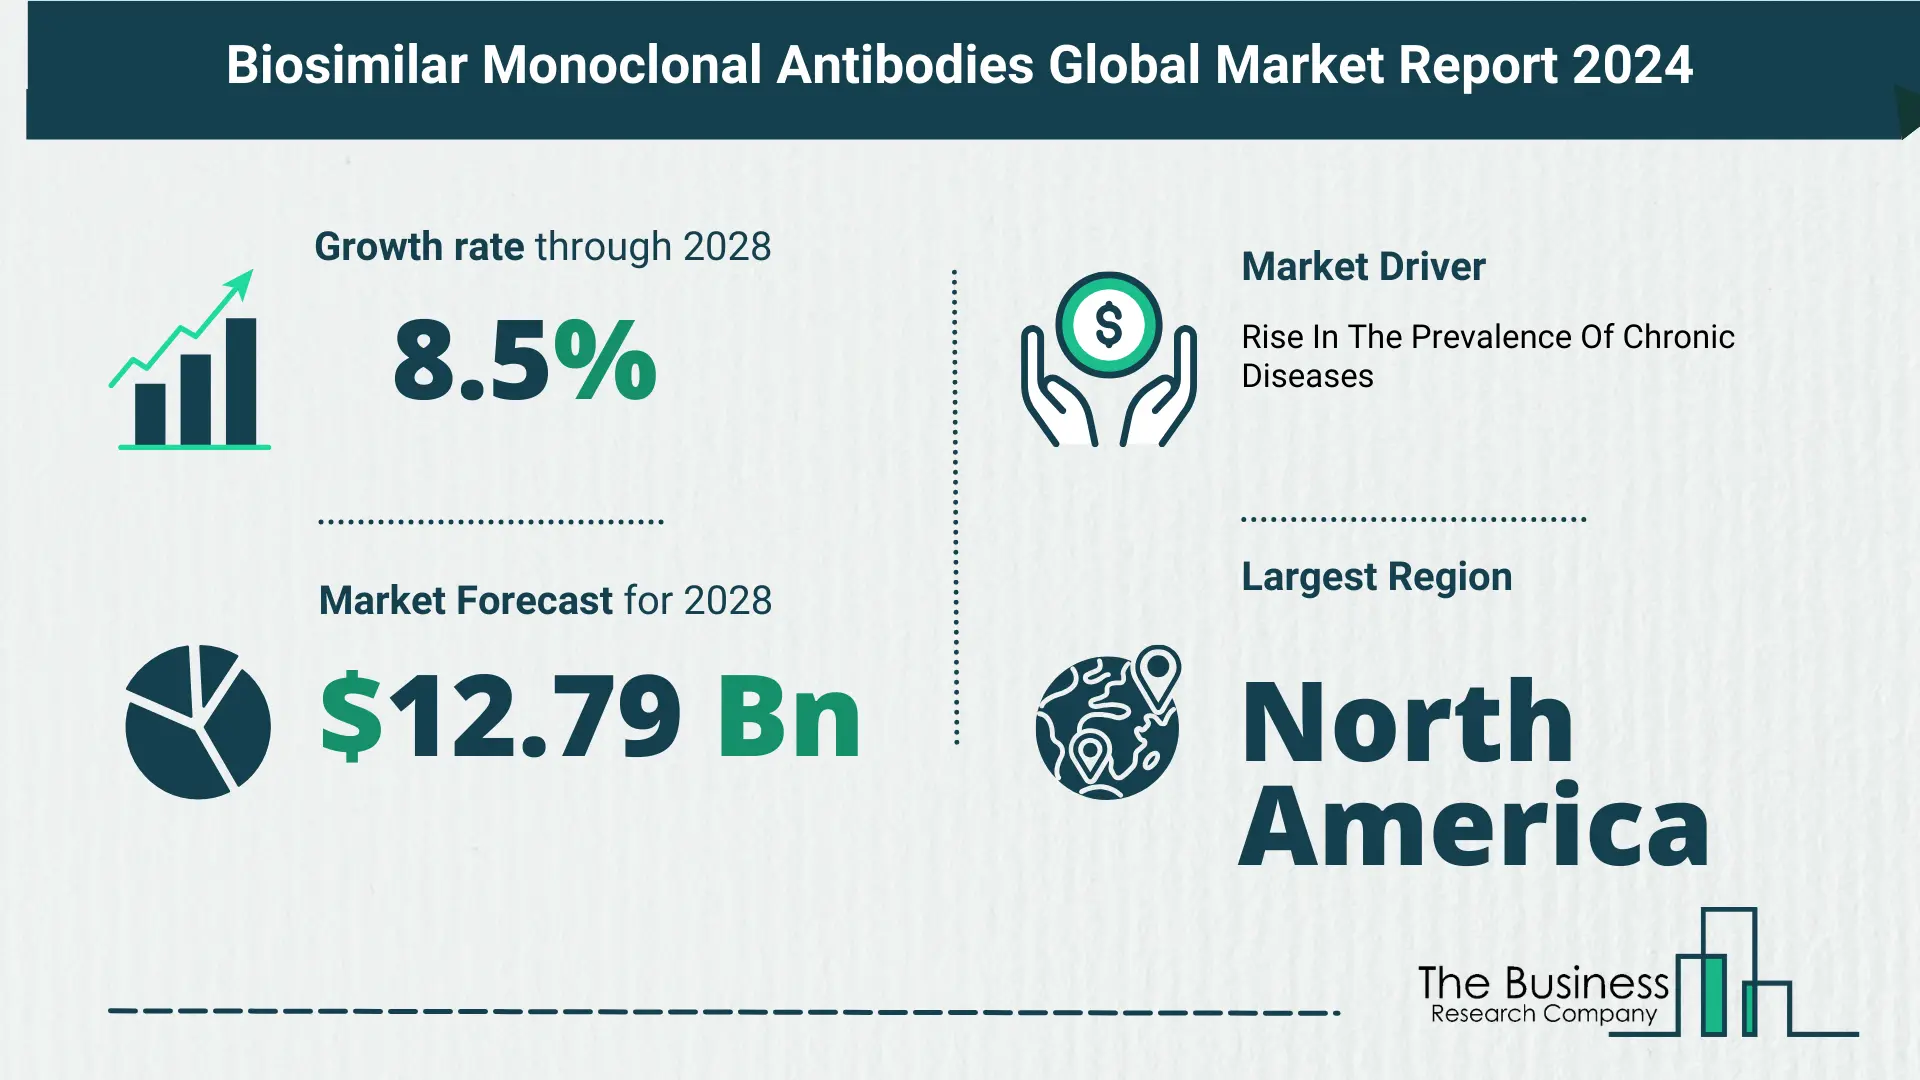 Key Insights On The Biosimilar Monoclonal Antibodies Market 2024 – Size, Driver, And Major Players